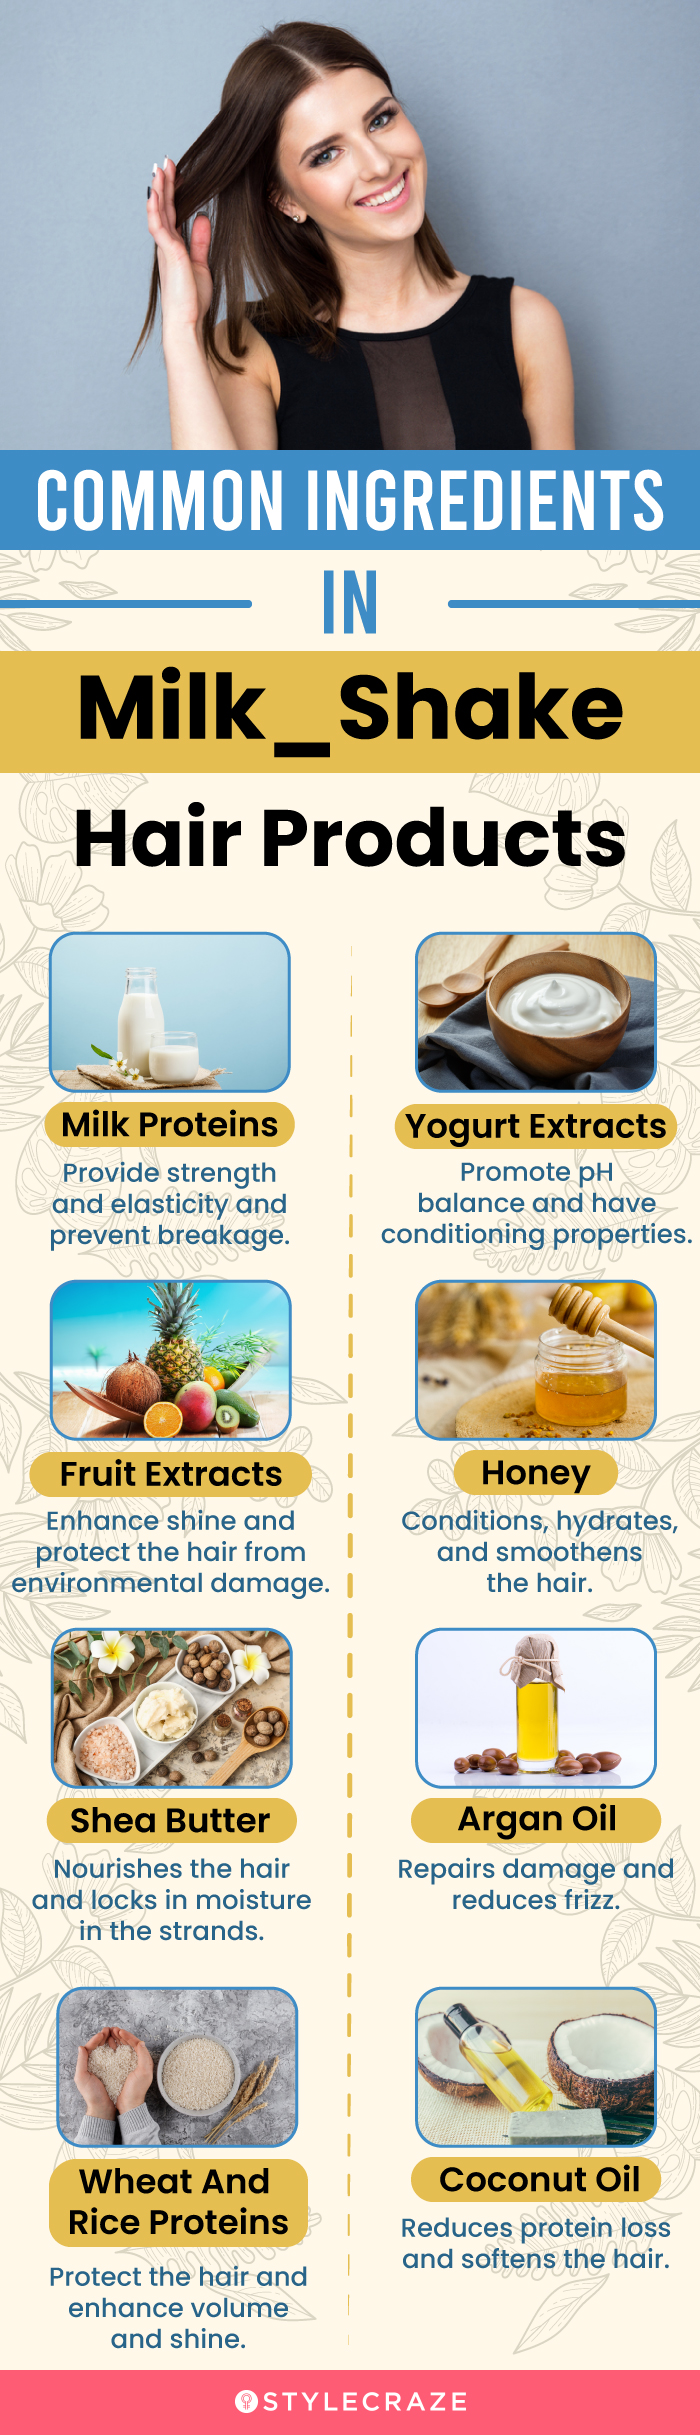 Common Ingredients In Milk_Shake Hair Products (infographic)